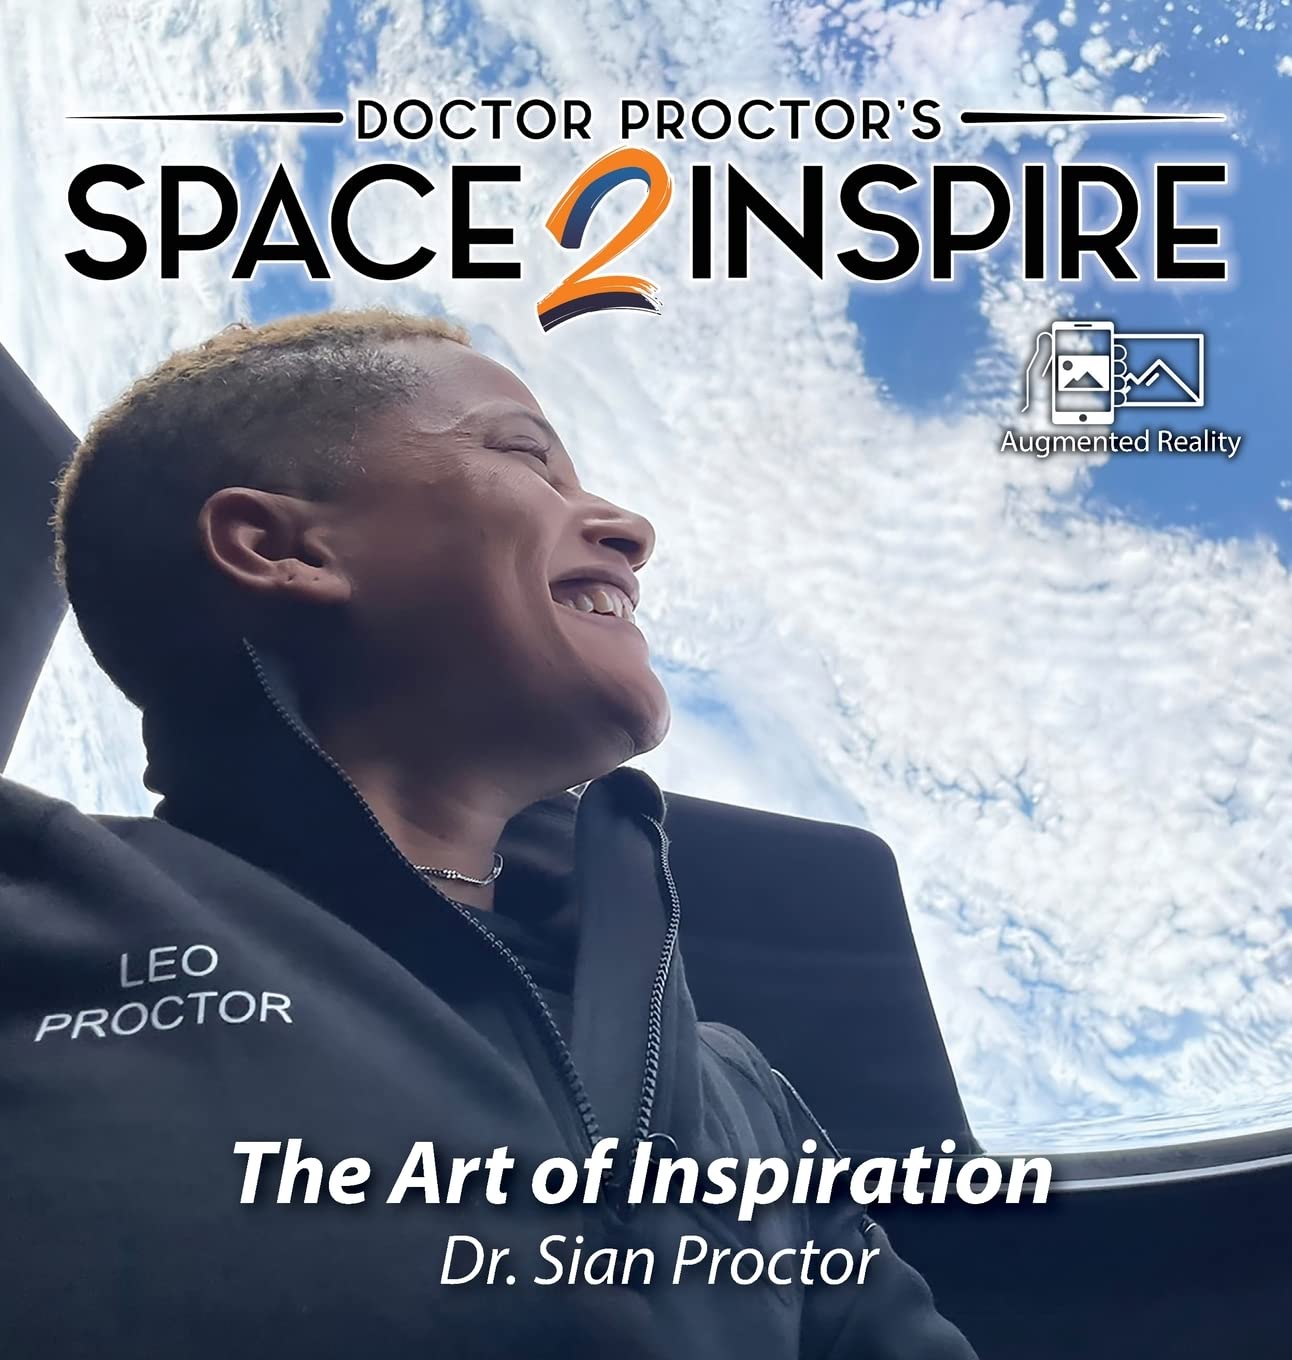 Space2inspire: The Art of Inspiration